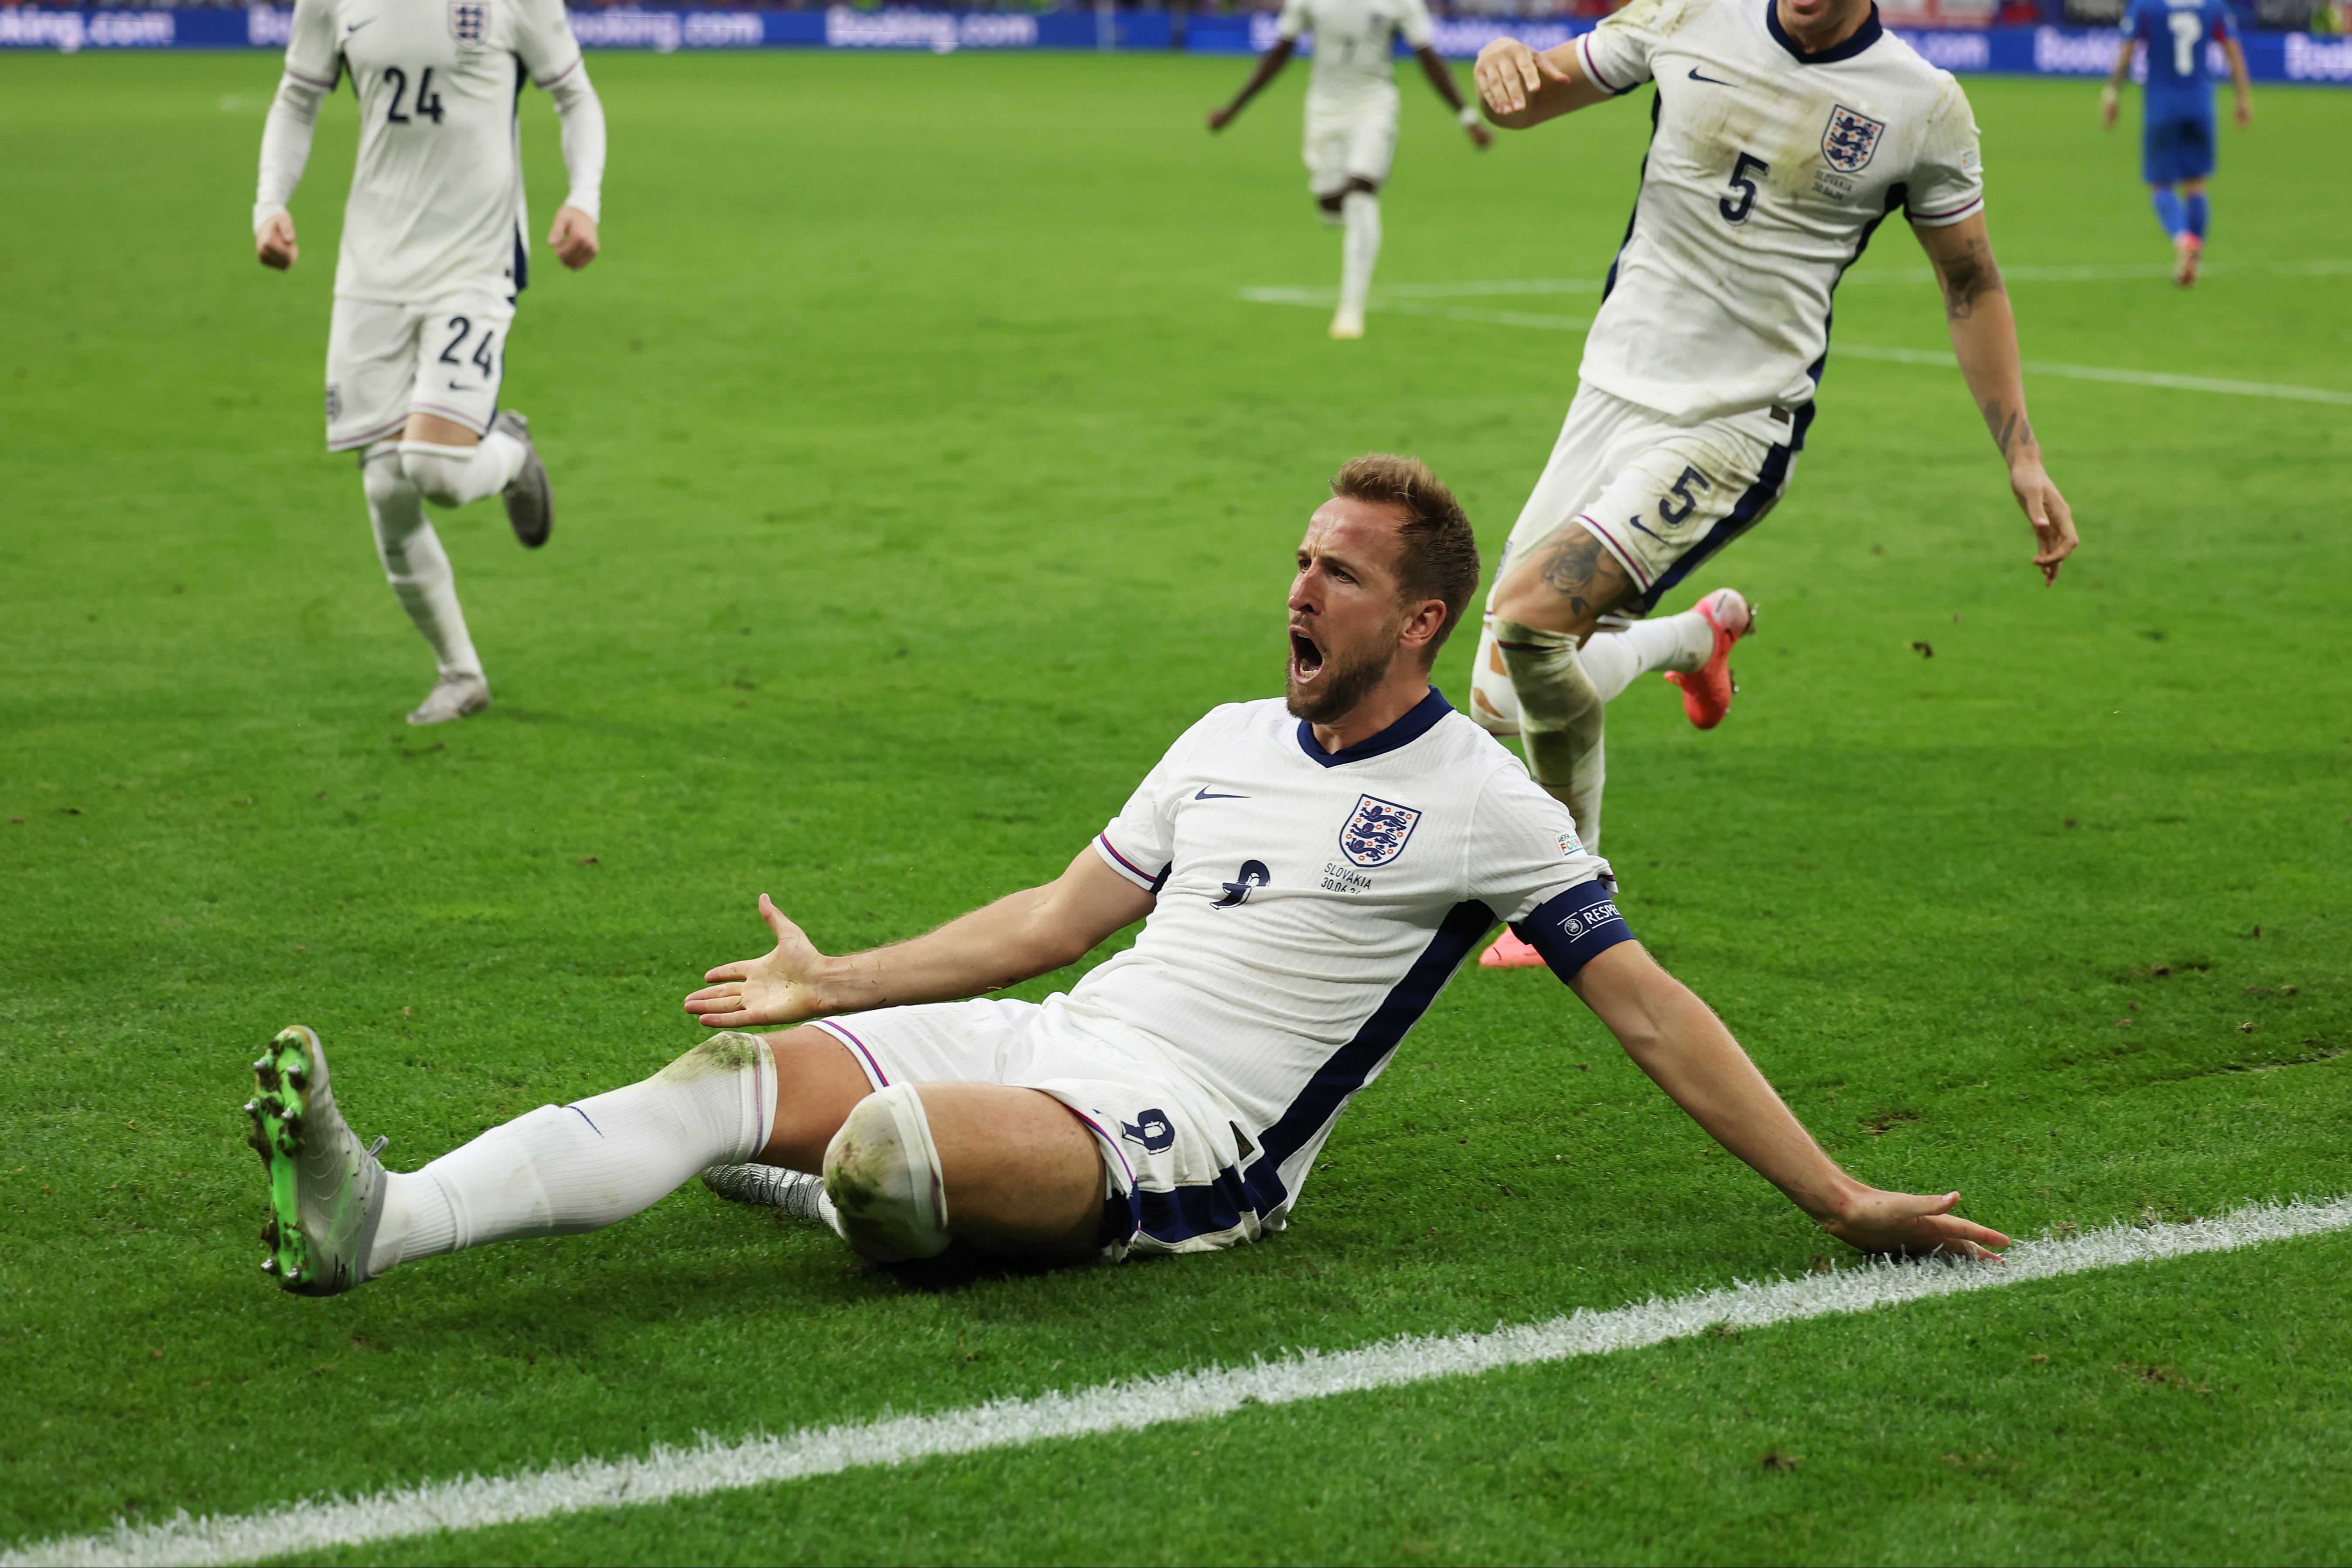 Harry Kane gradually improved as the game wore on, culminating in his extra-time goal